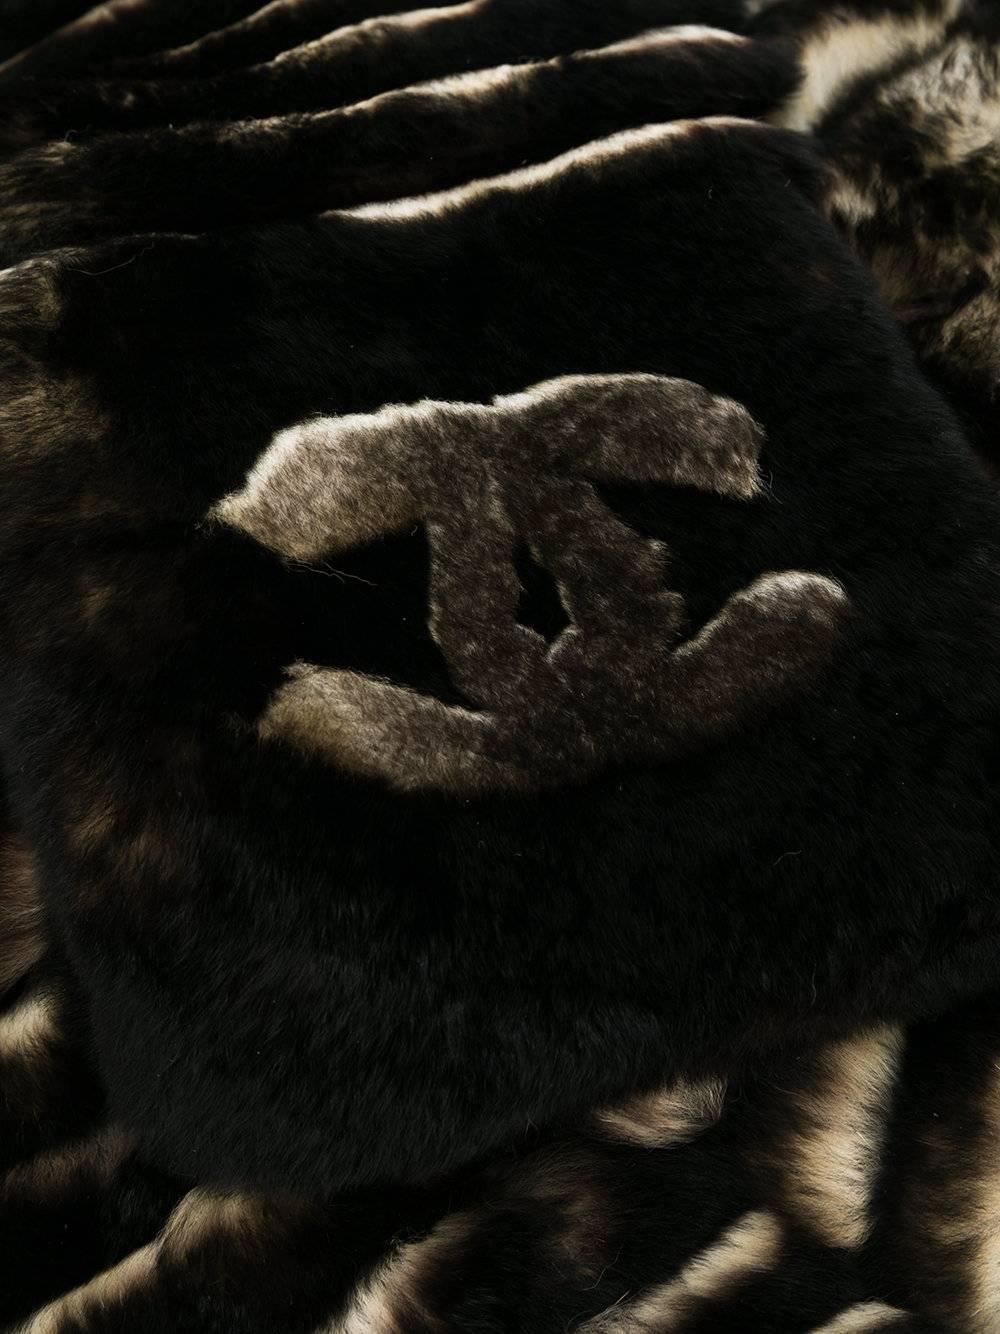 Brown cashmere orilag fur scarf from Chanel Vintage featuring a signature interlocking CC logo and narrow pelts.

Colour: Brown

Composition: 30% Cashmere, 70% Orilag Fur

One Size

Condition: 9/10